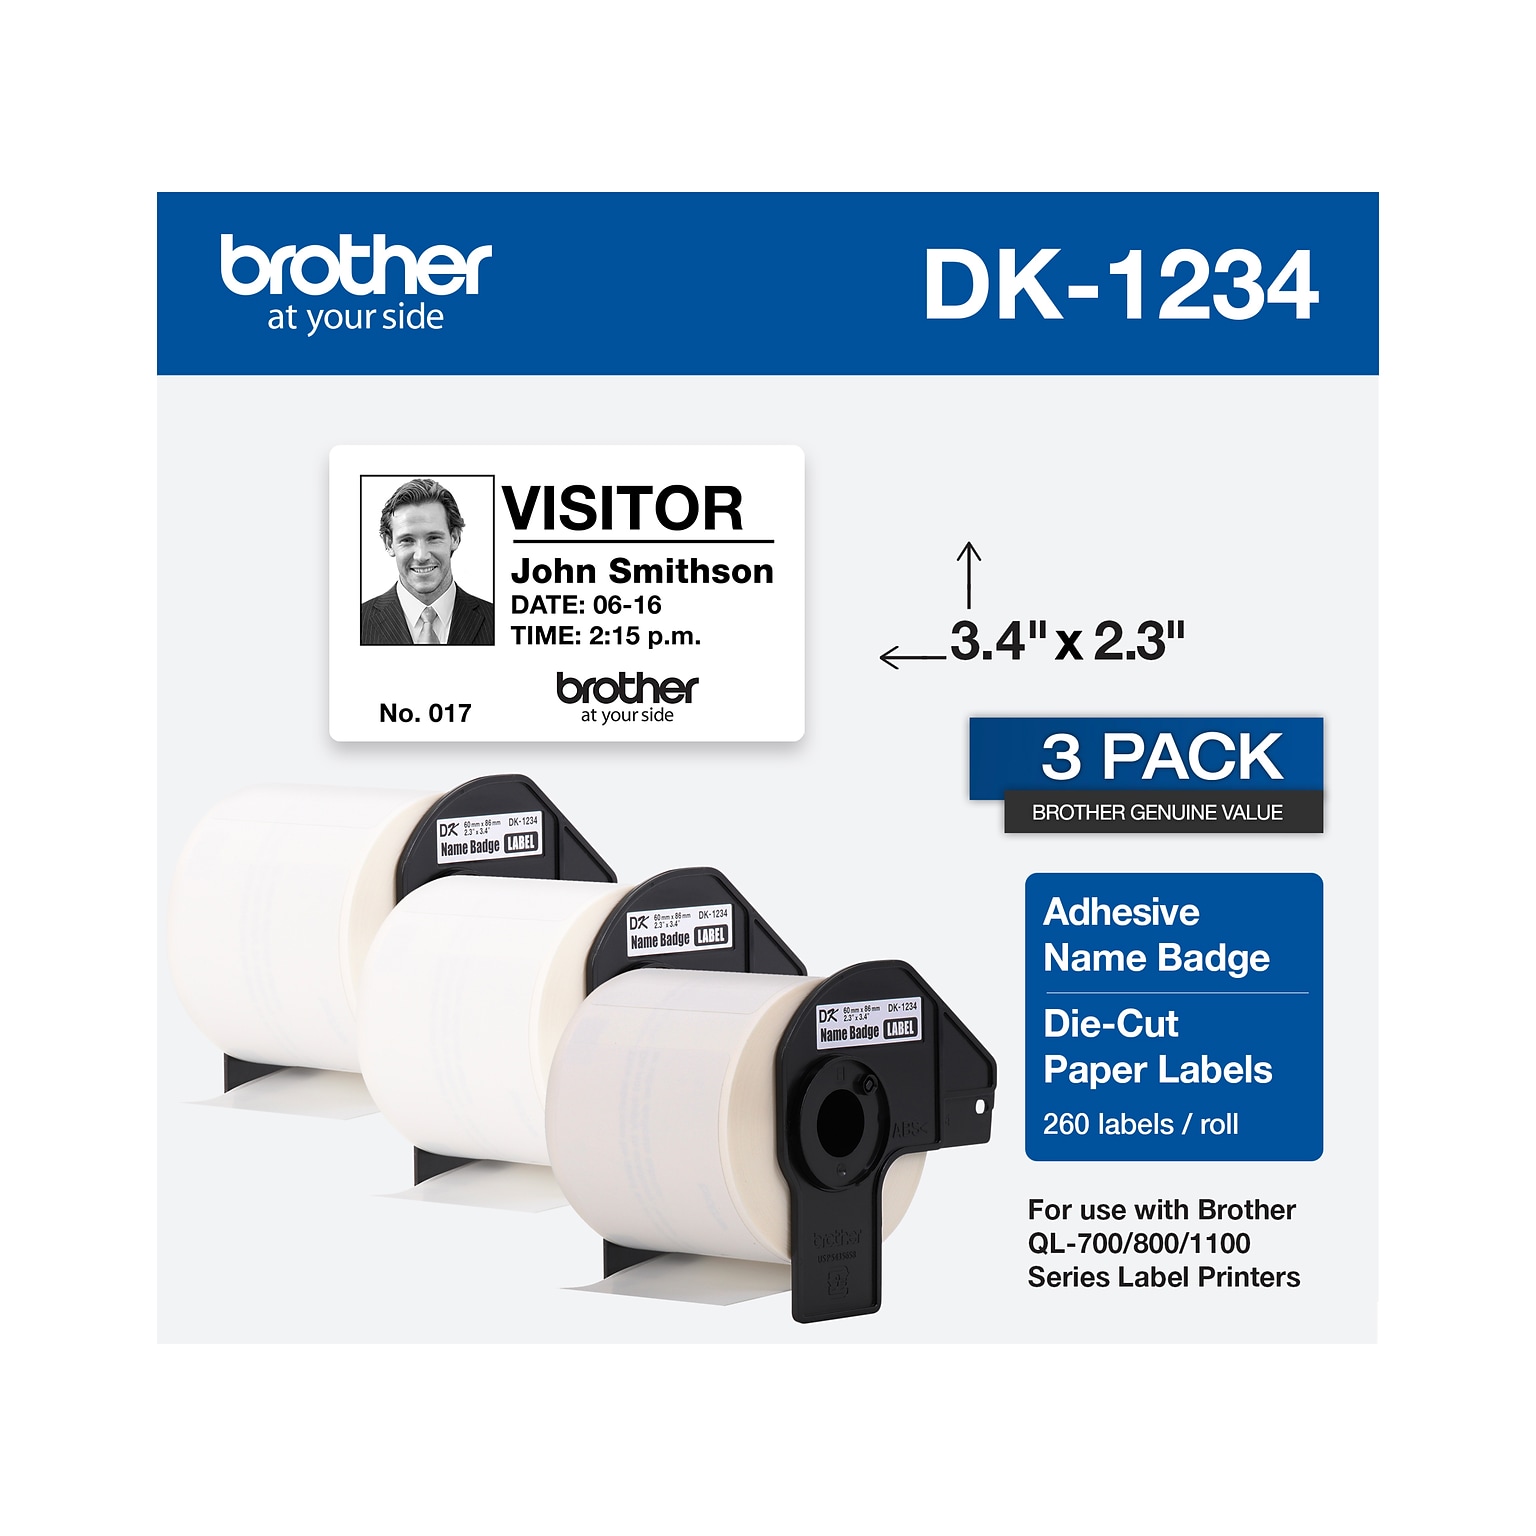 Brother DK-1234 Adhesive Name Badge Paper Labels, 3-4/10 x 2-3/10, Black on White, 260 Labels/Roll, 3 Rolls/Box (DK-12343PK)